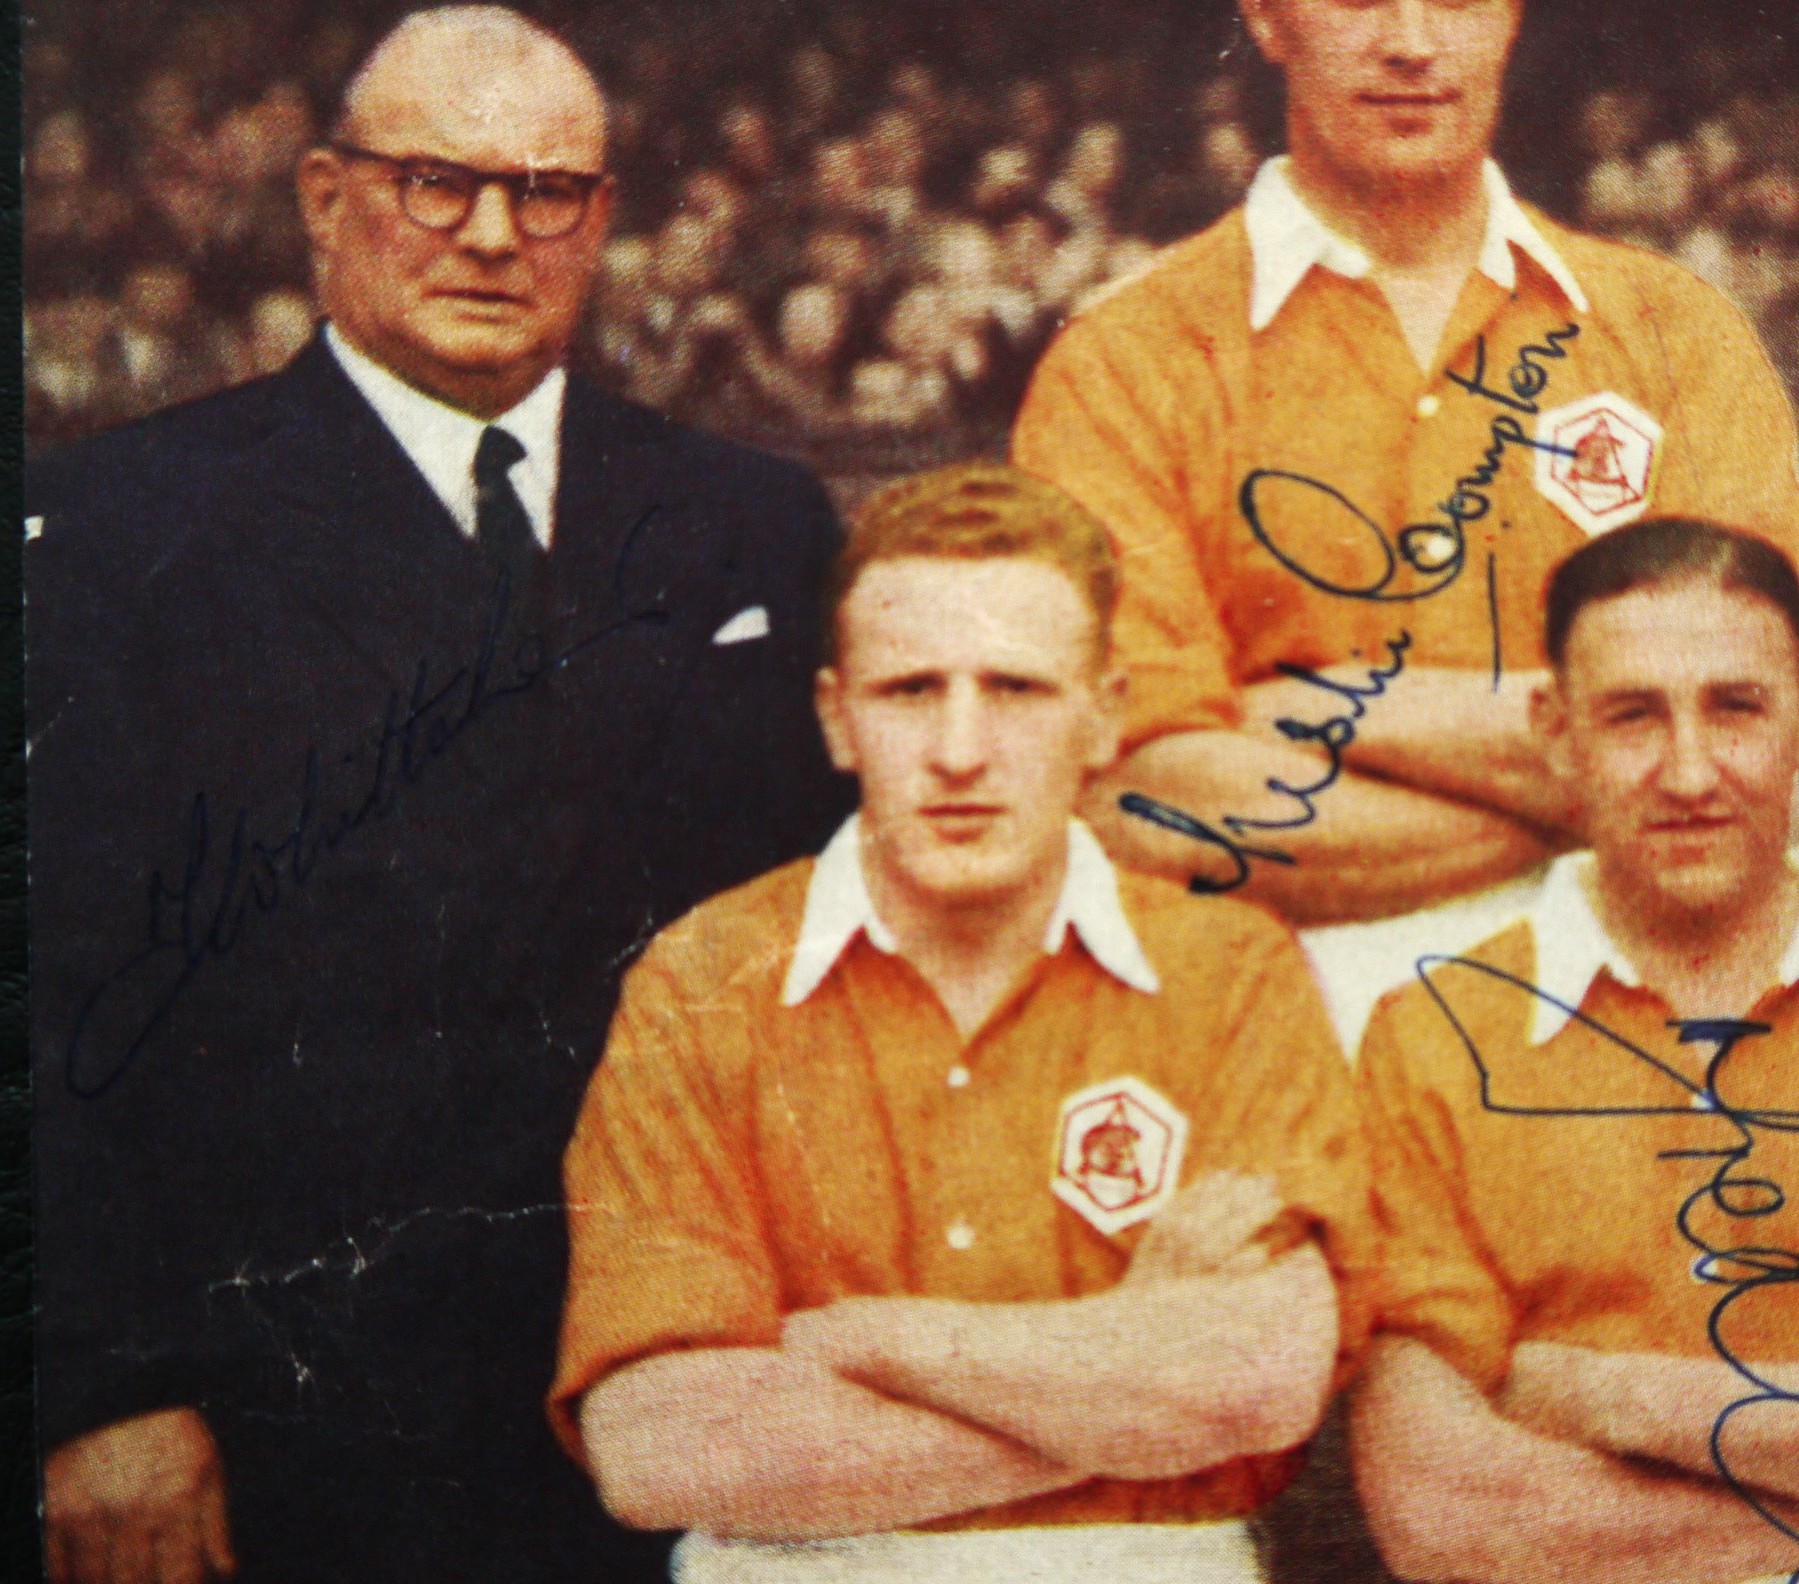 ARSENAL 1950 FA CUP FINAL FULLY SIGNED PICTURE - Image 3 of 3